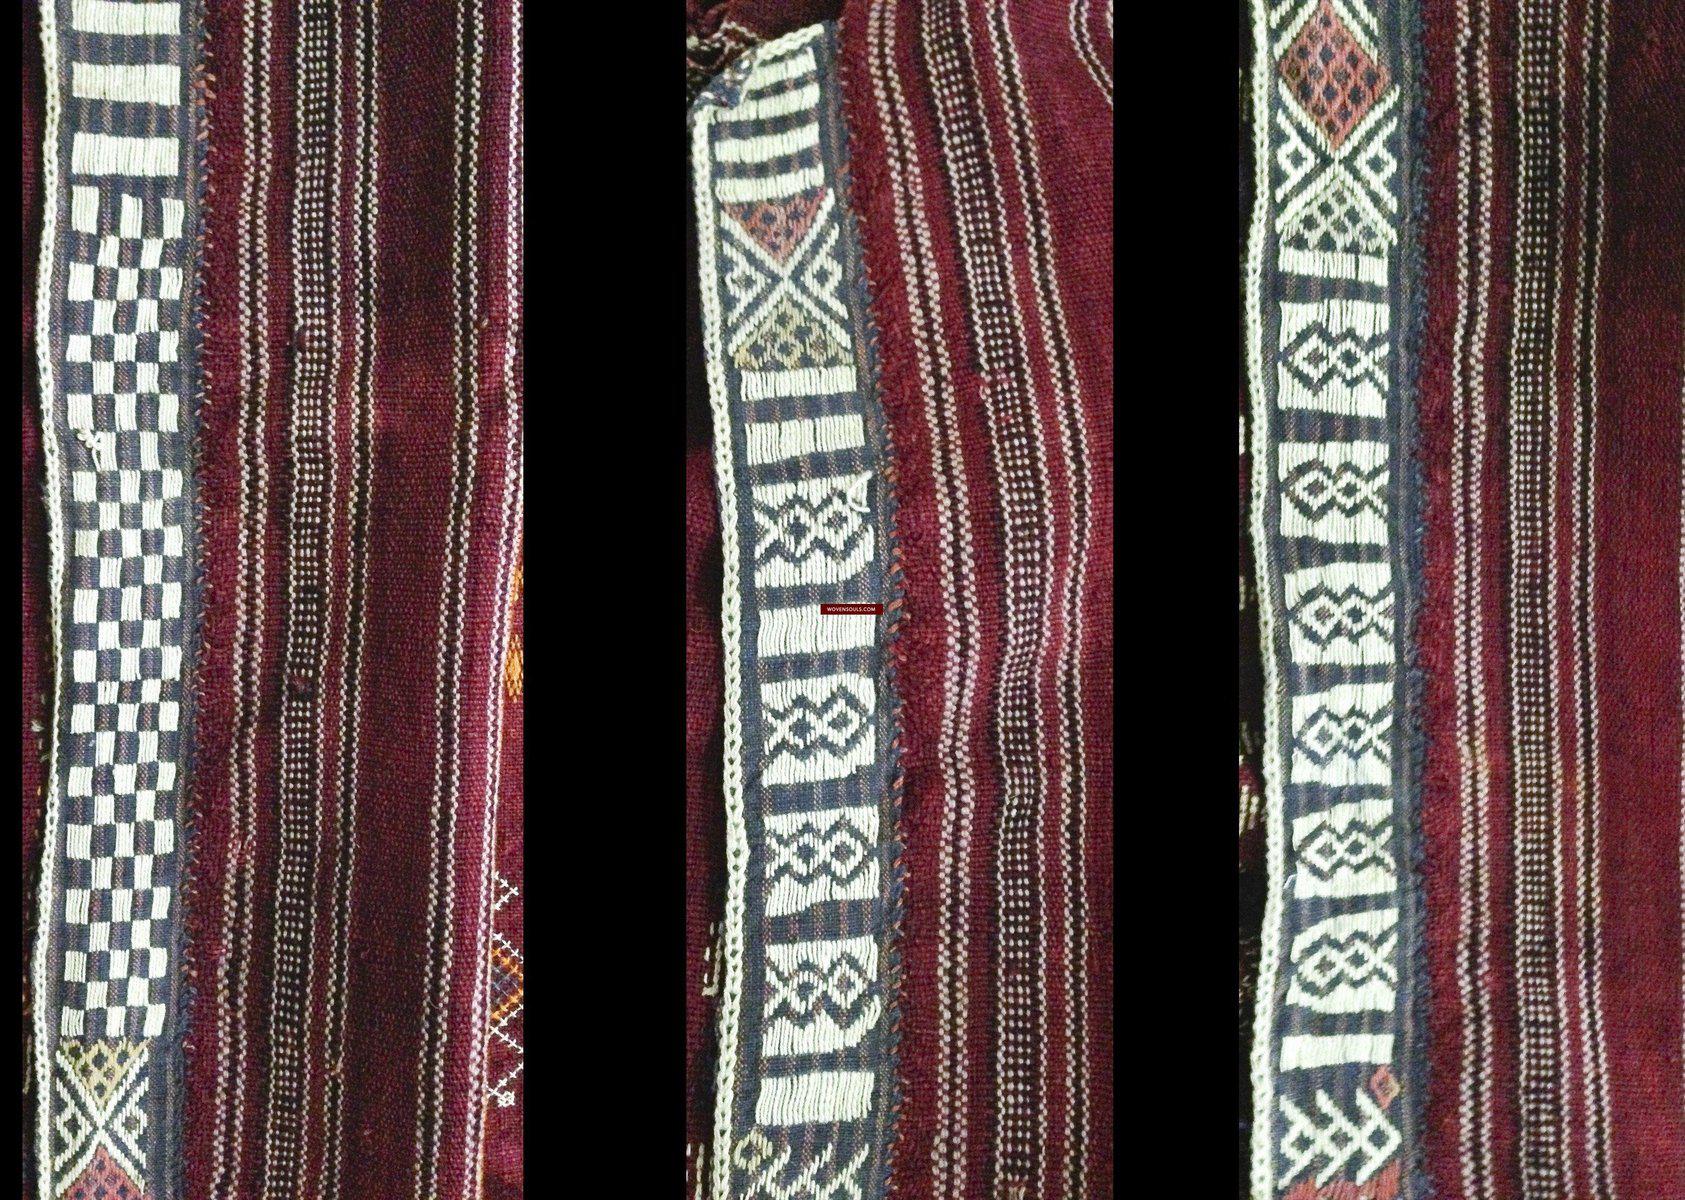 676 SOLD Bishnoi Odhana Shawl - Tribal Textile with Naive Embroidery ...